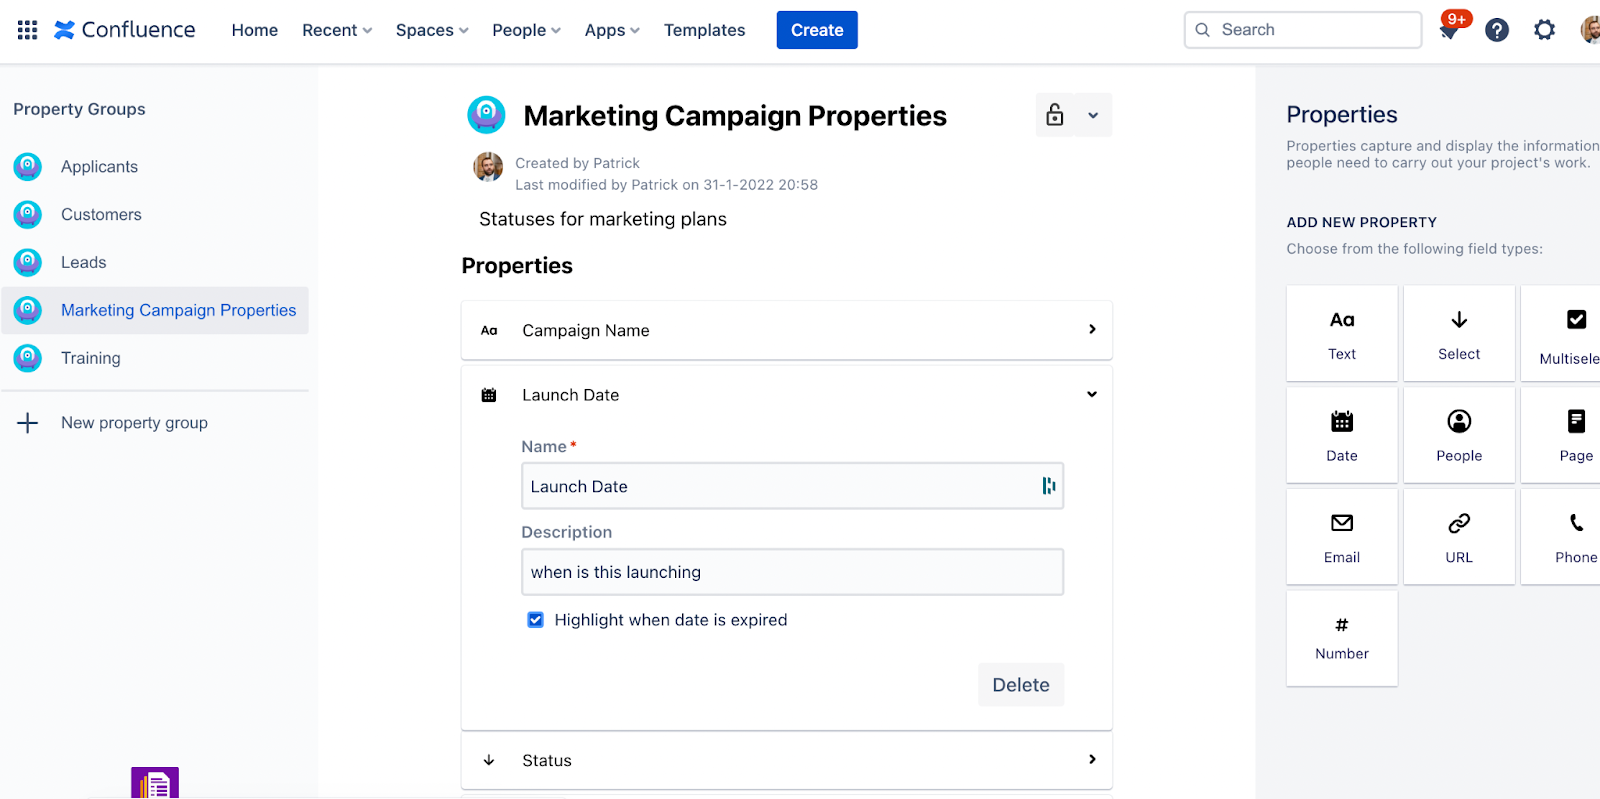 New Properties features at the end of 2022 - Using the Date field for a Launch Date in a marketing campaign